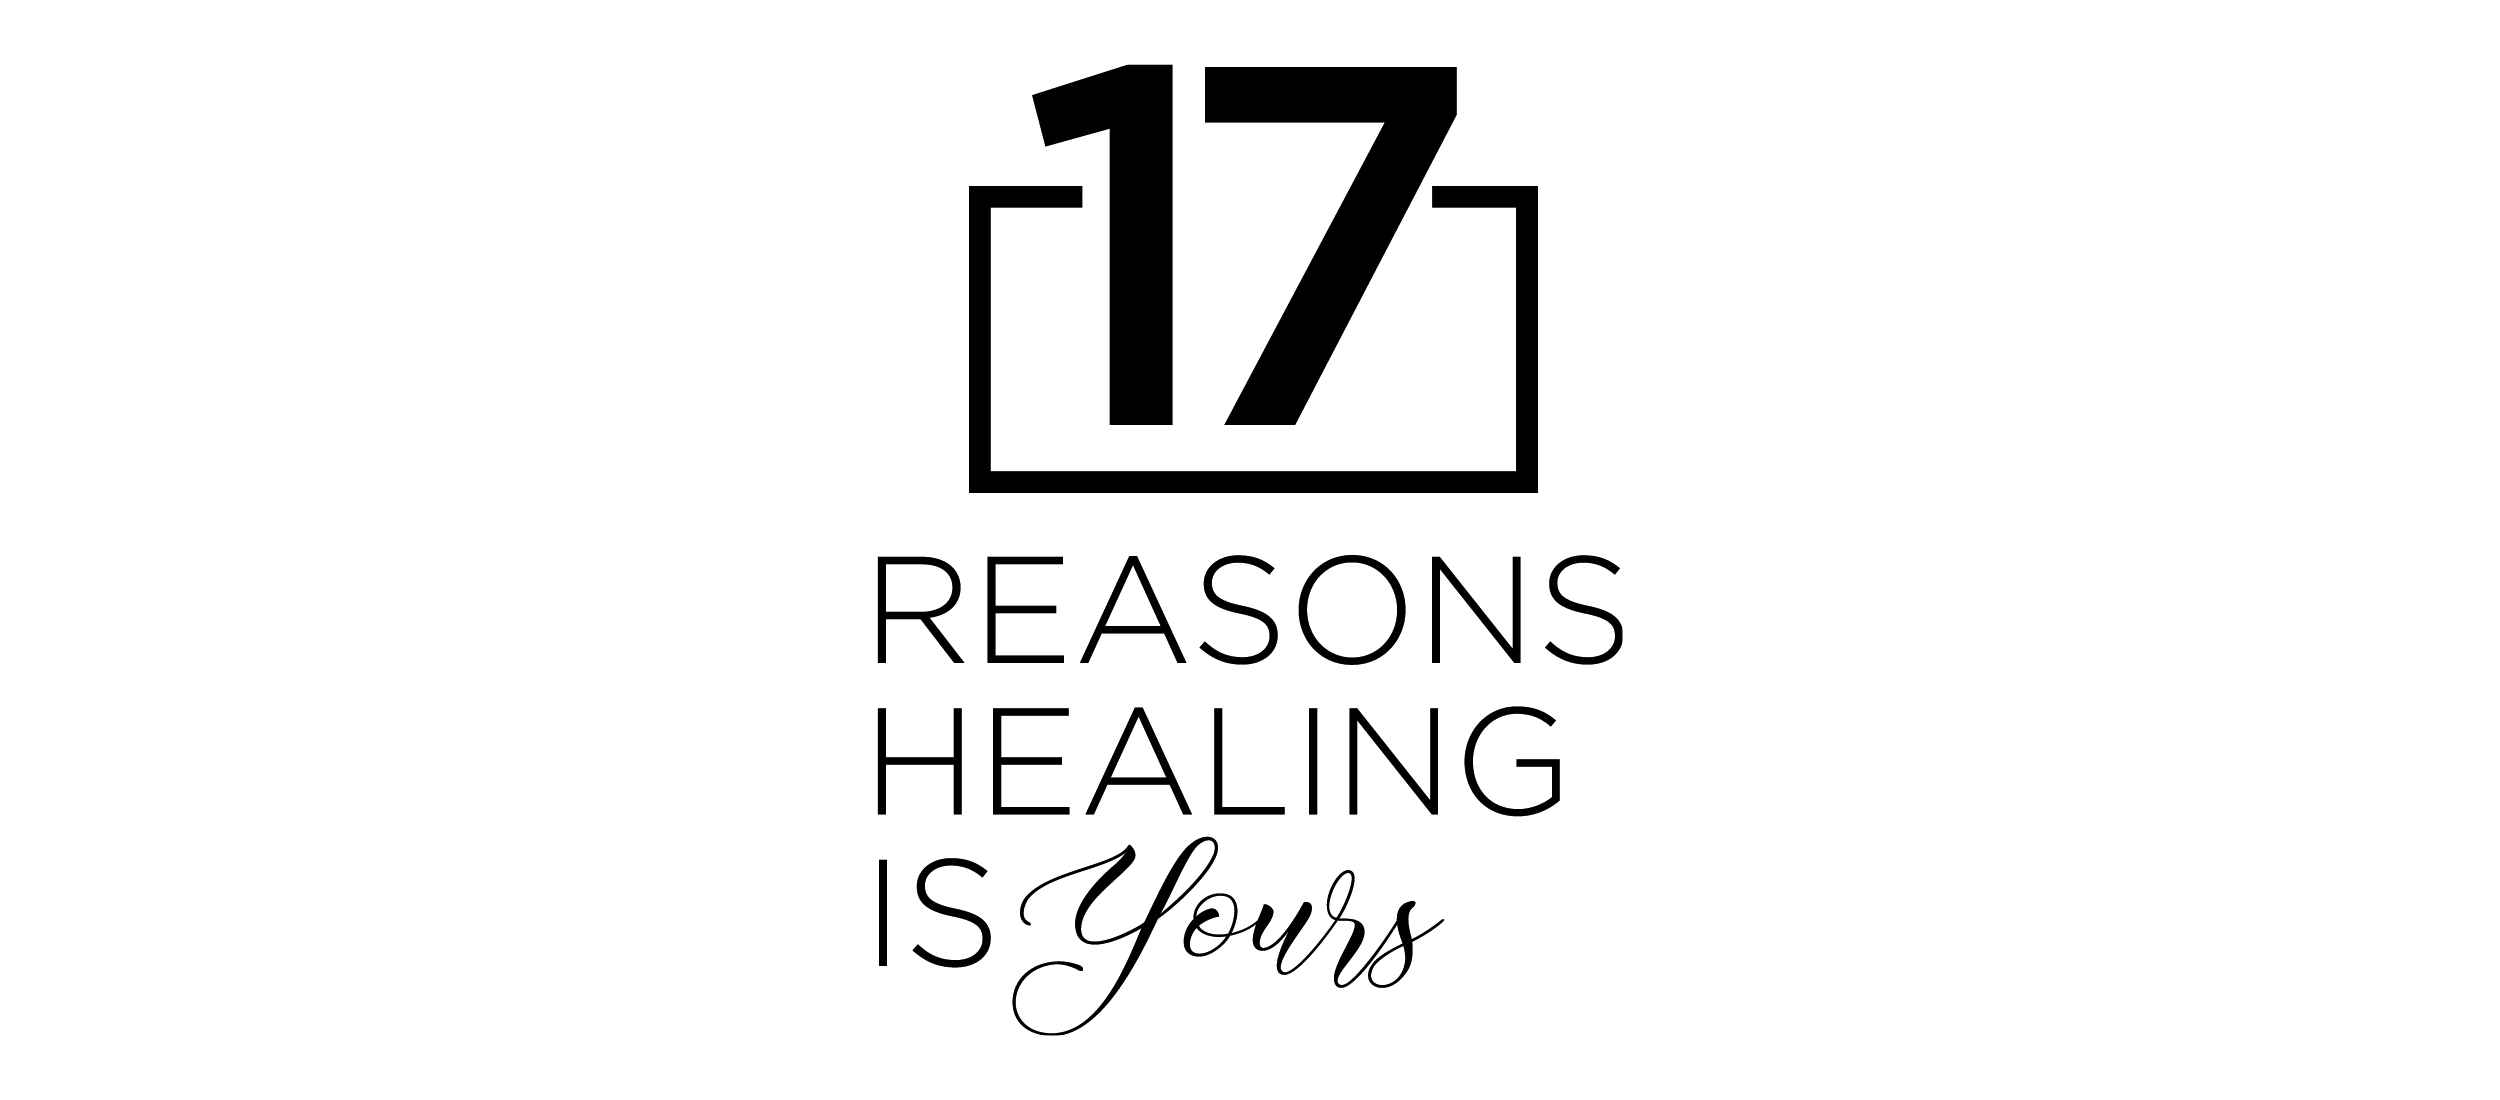 17 Reasons Healing is Yours